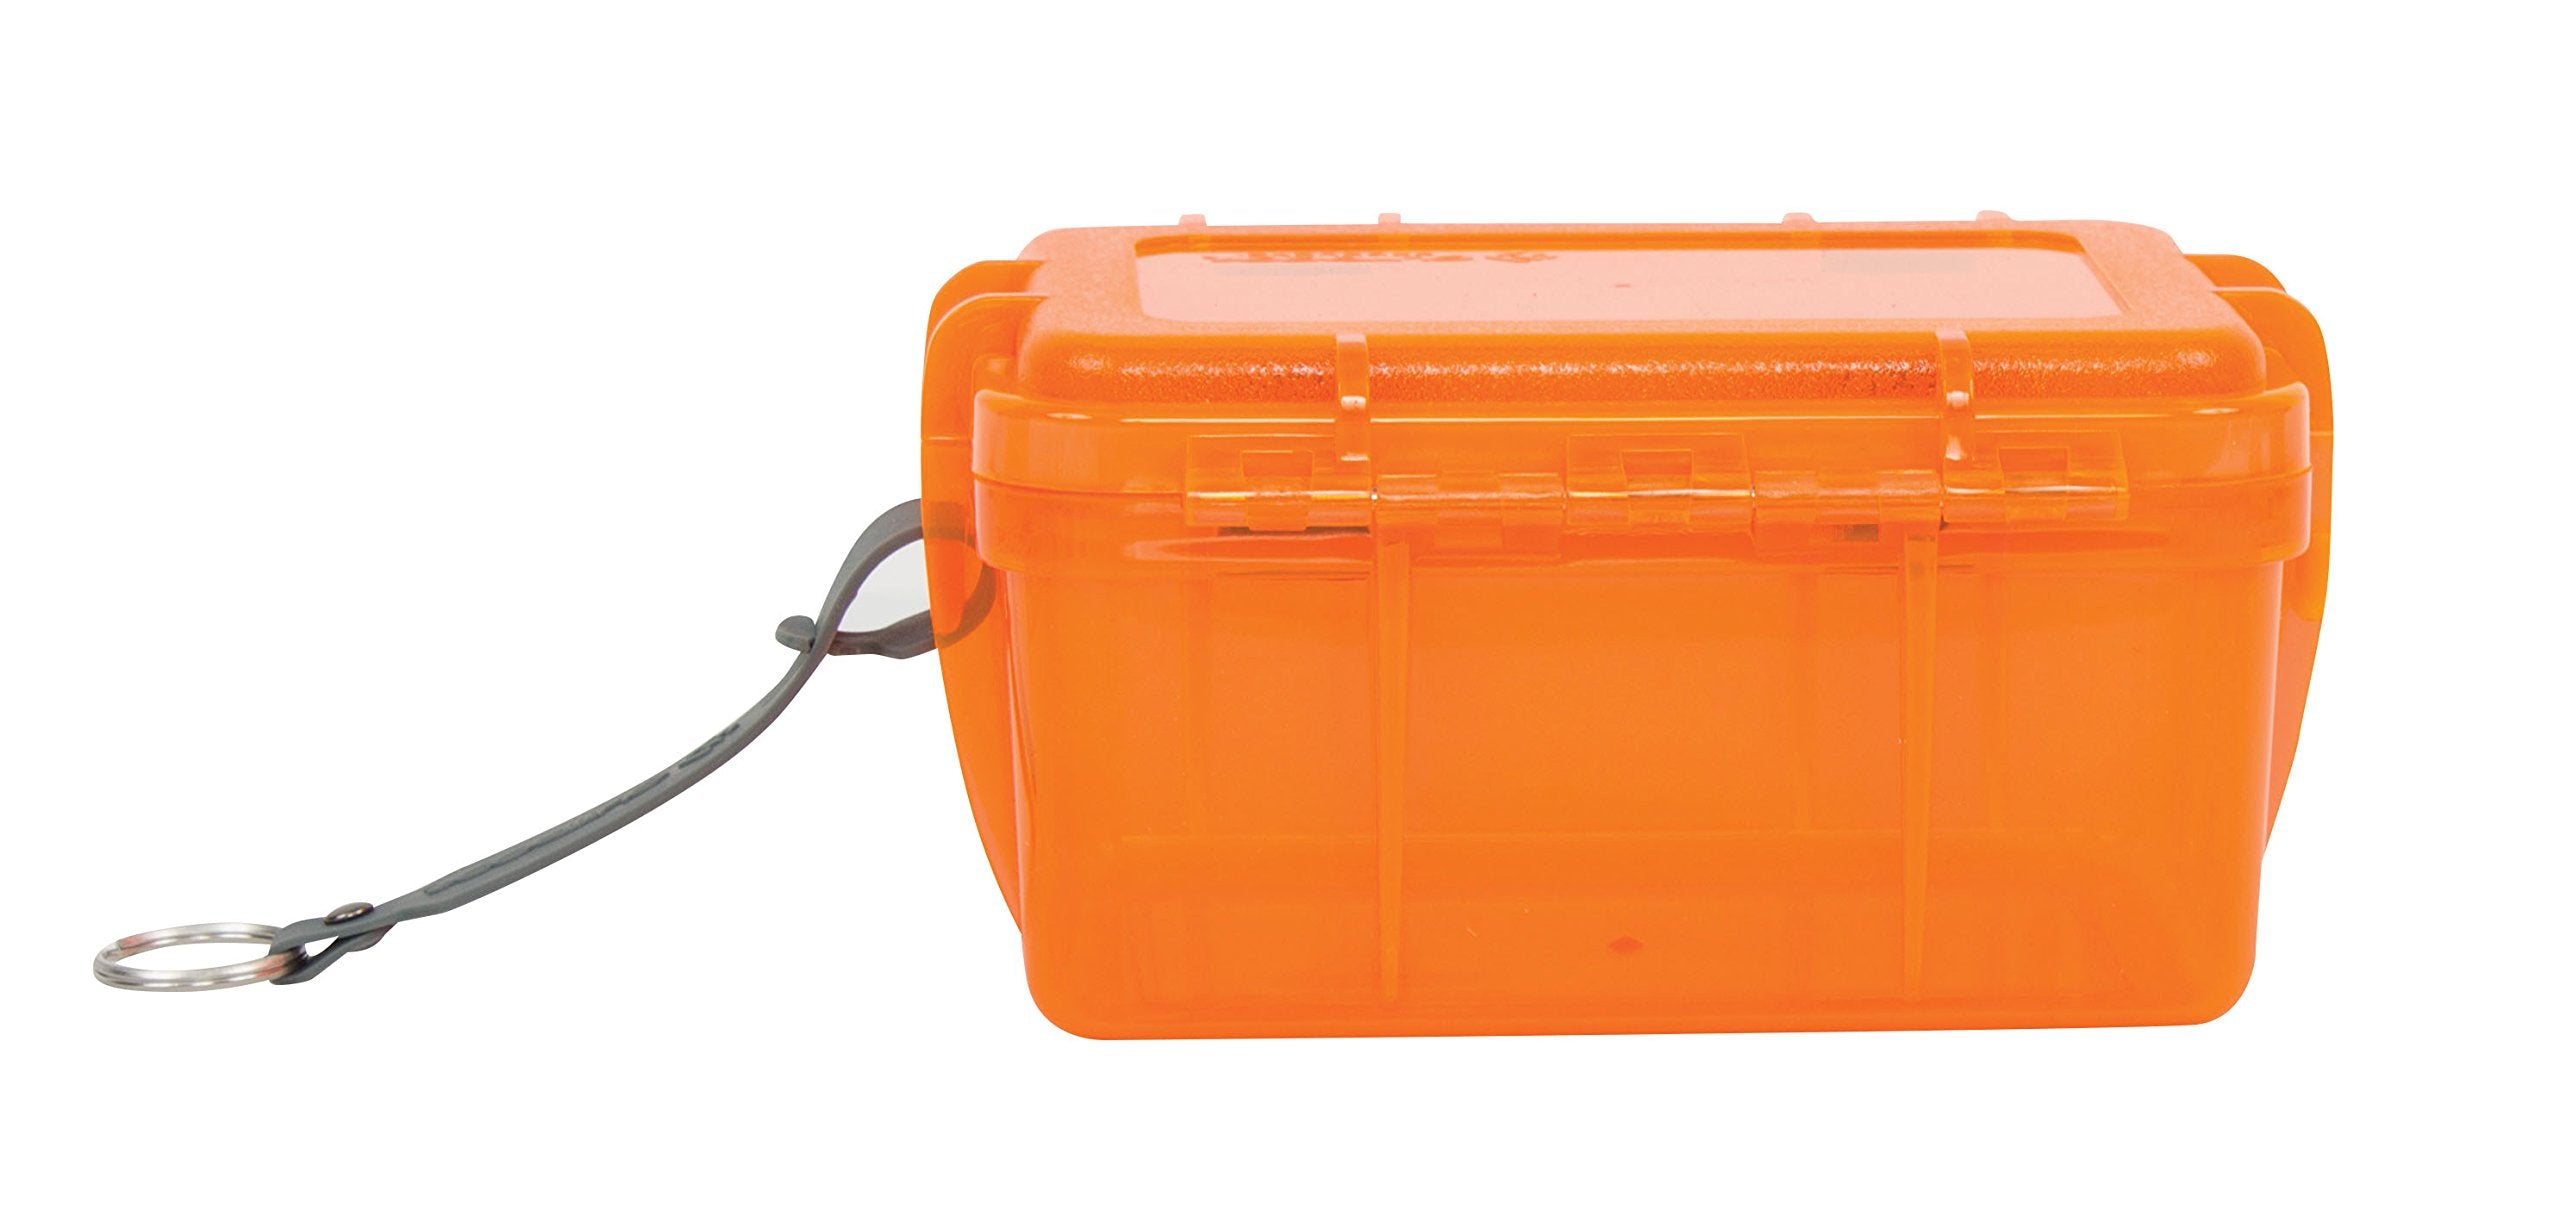 Outdoor Products - Watertight Box (Dress Blues Small)